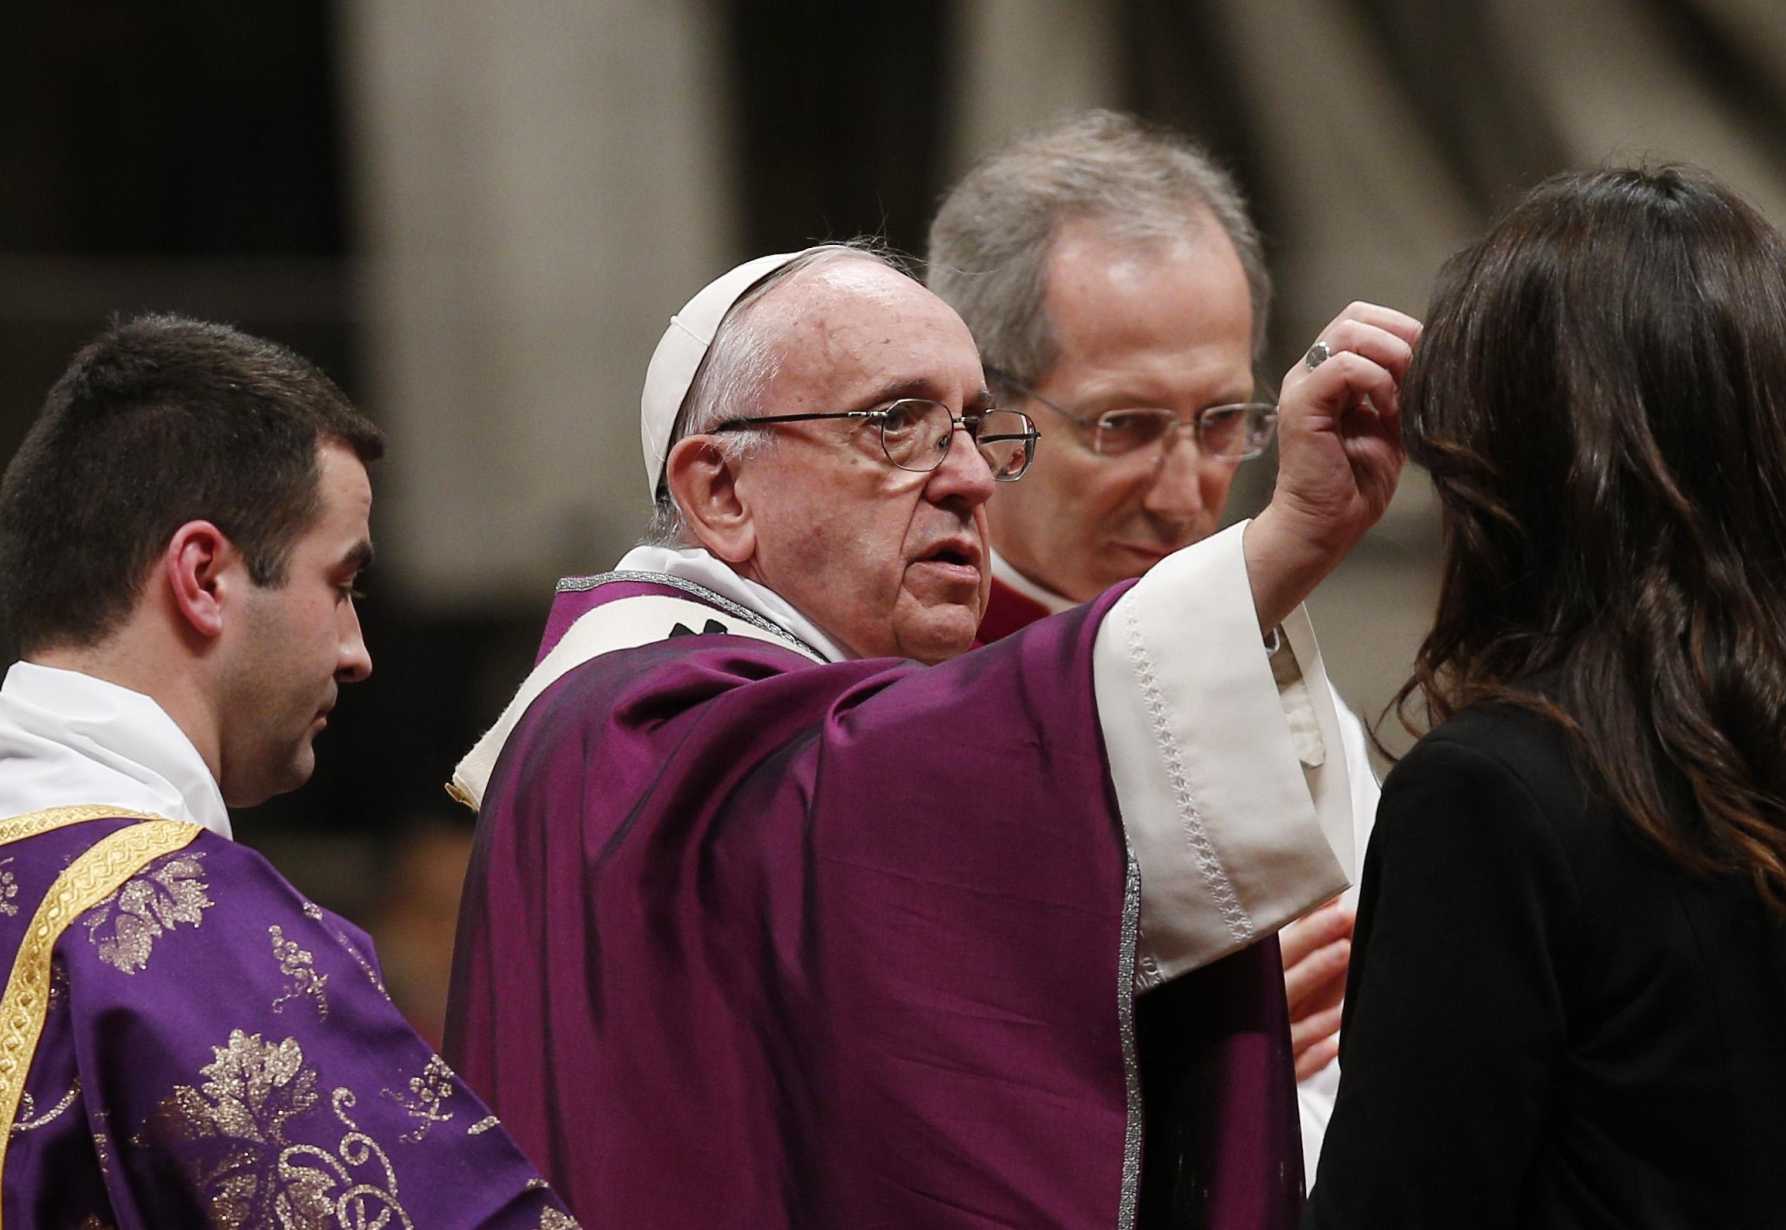 Pope: Synodal and Lenten journeys require effort, sacrifice, focusing on God